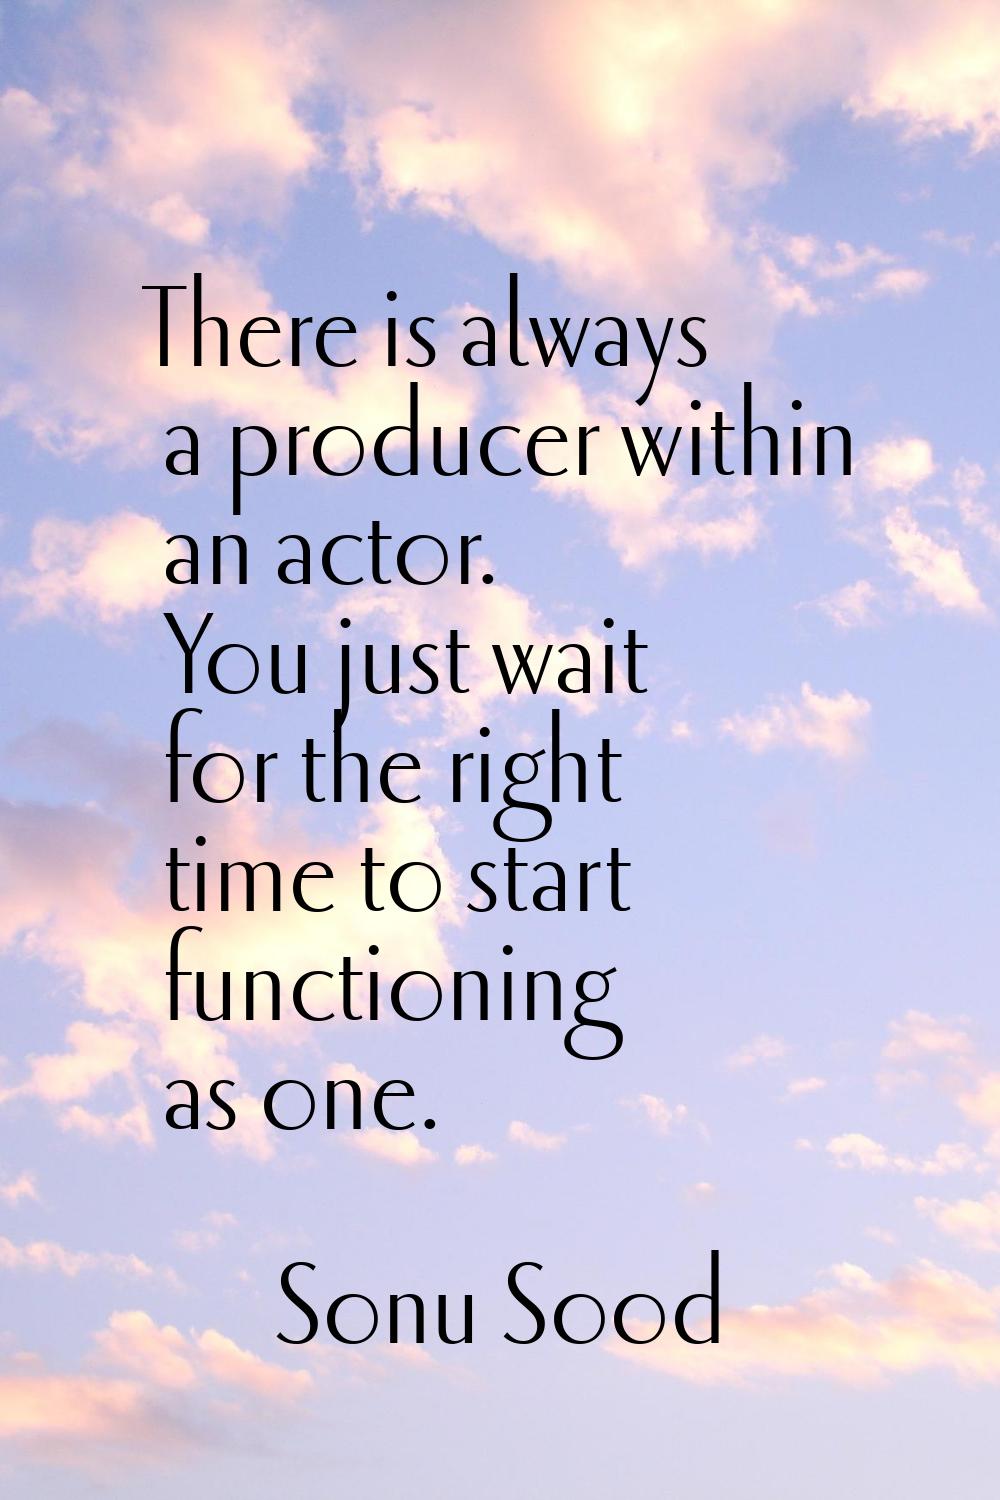 There is always a producer within an actor. You just wait for the right time to start functioning a